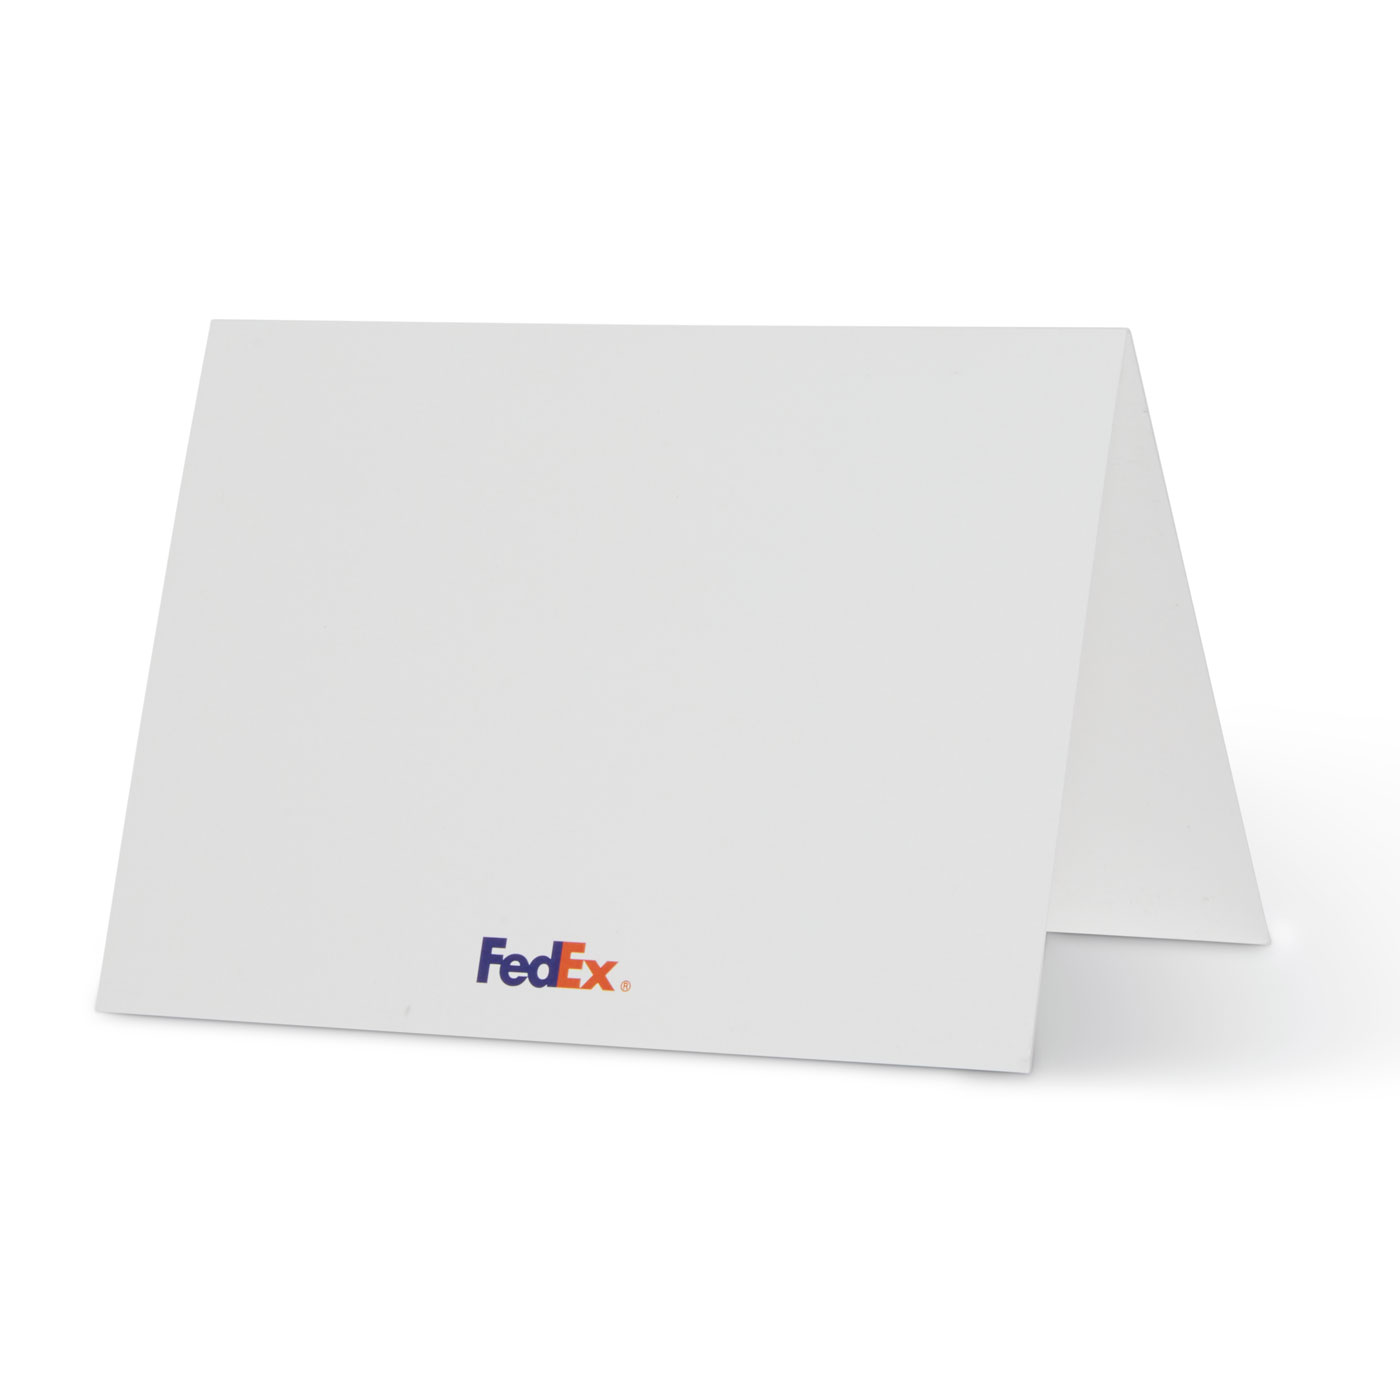 FedEx Holiday Cards (12 Pack) The FedEx Company Store